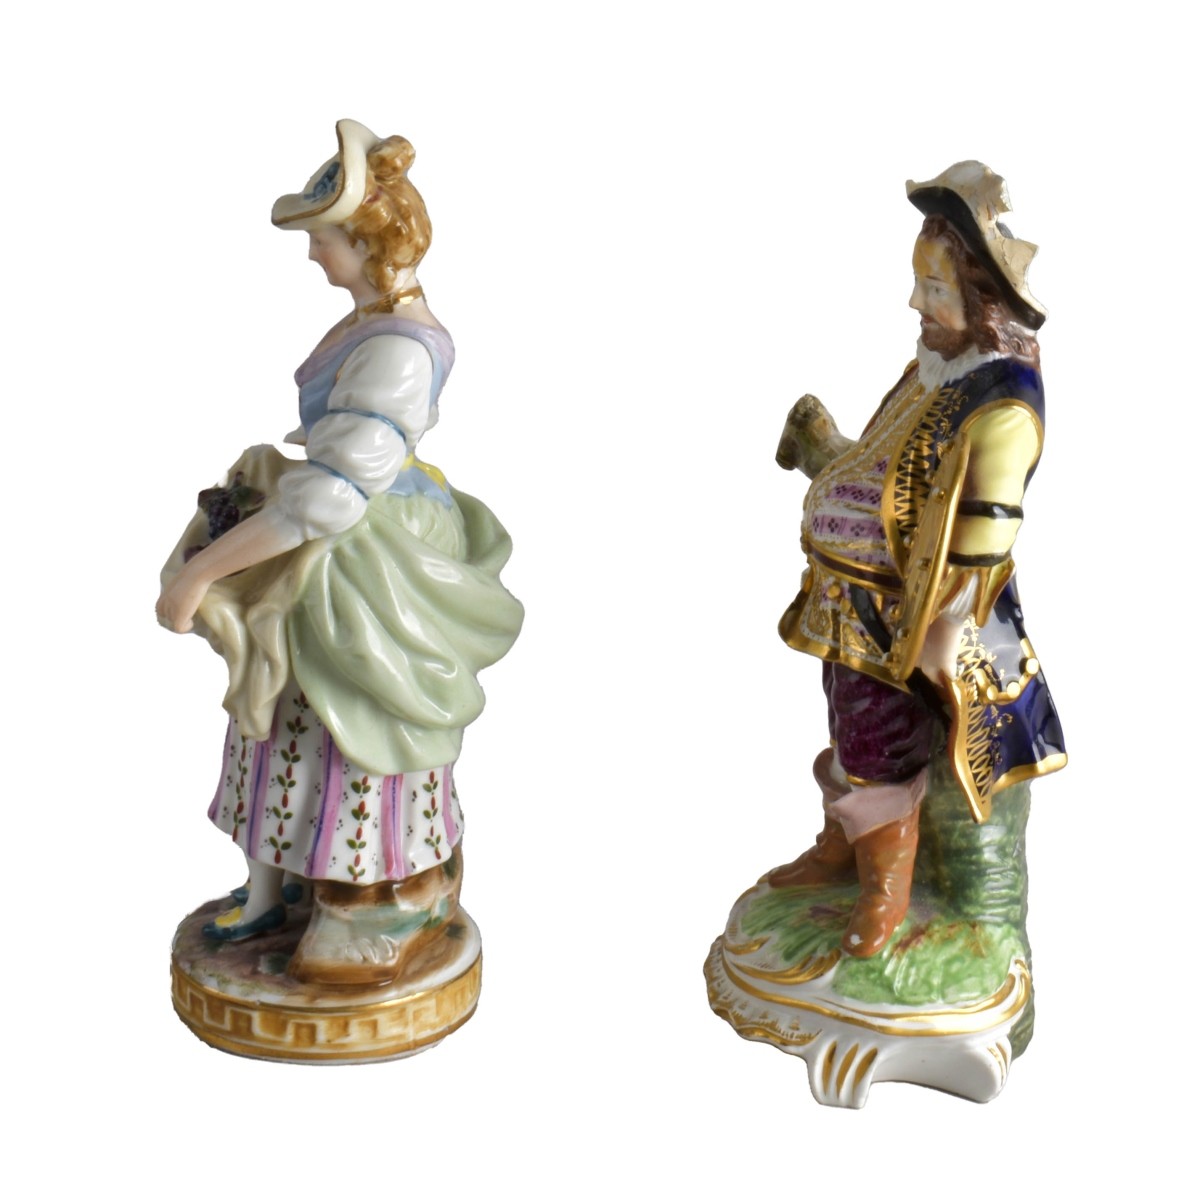 Grouping of Two Porcelain Figurines